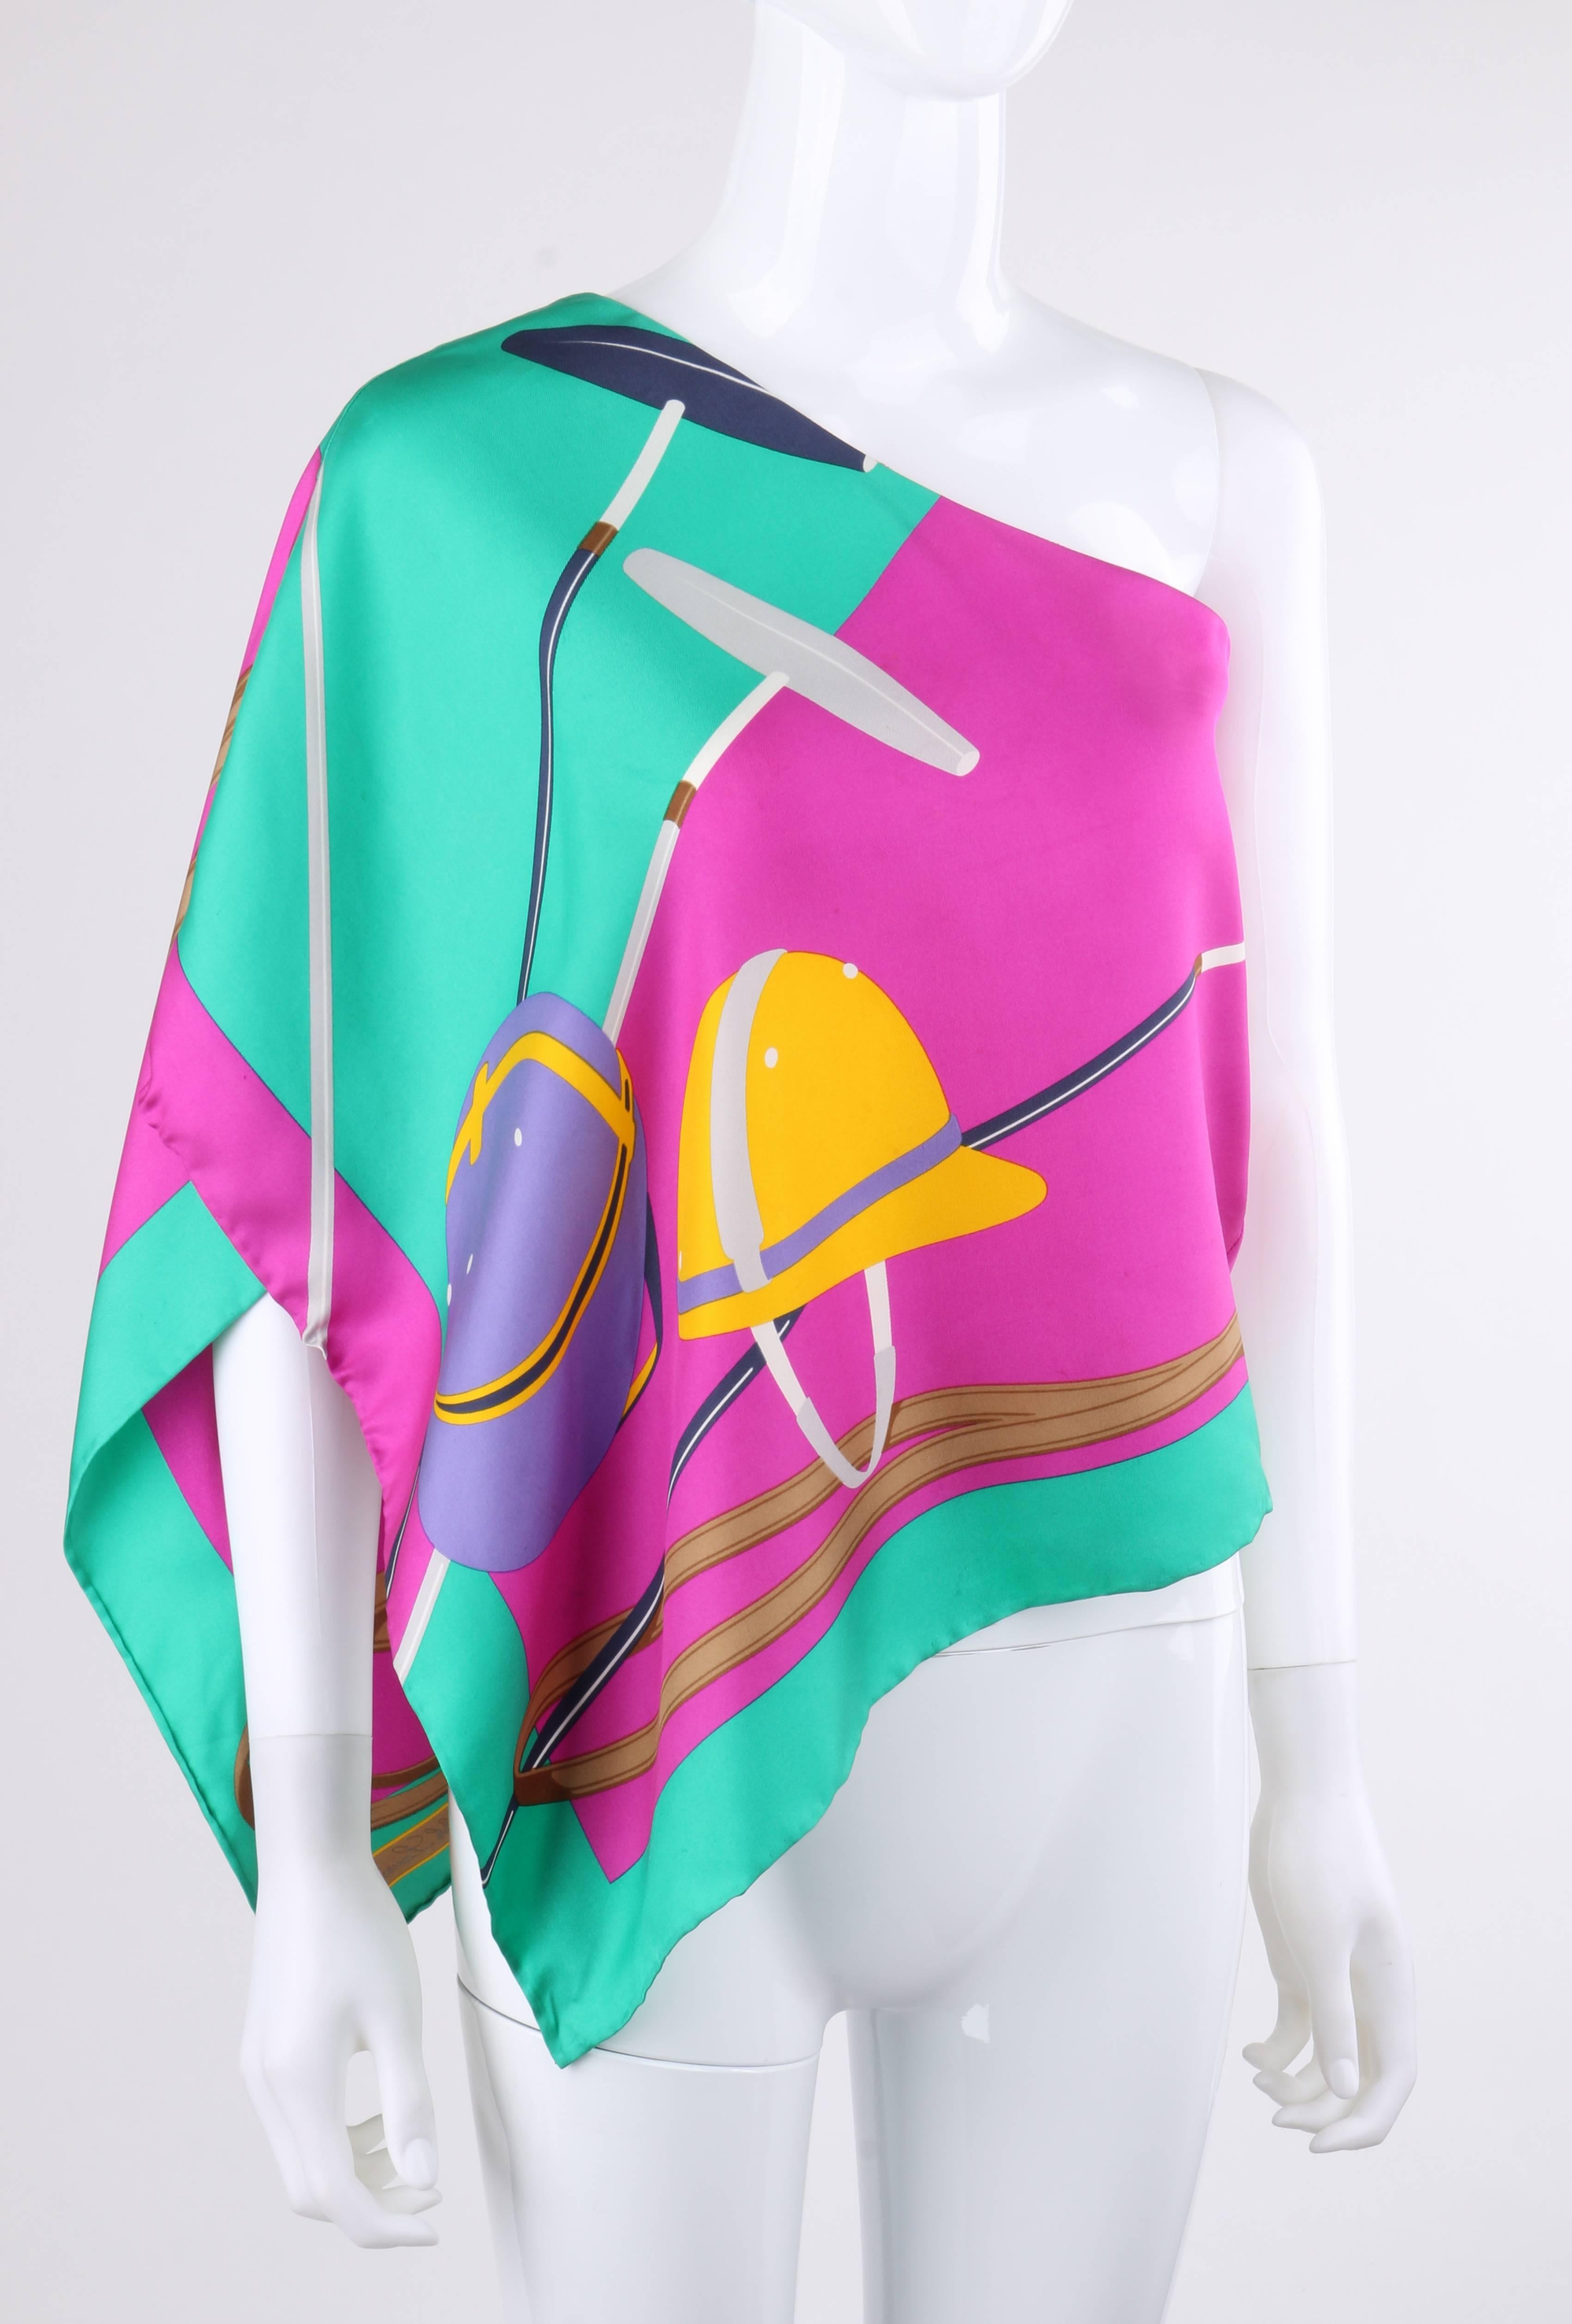 Ralph Lauren Collection (Purple Label) 100% silk one shoulder scatf blouse. Bias draped silk scarf with a central polo helmet, mallet, and horse bridle motif on kelly green and fuchsia background. Invisible zipper with hook and eye closure at left